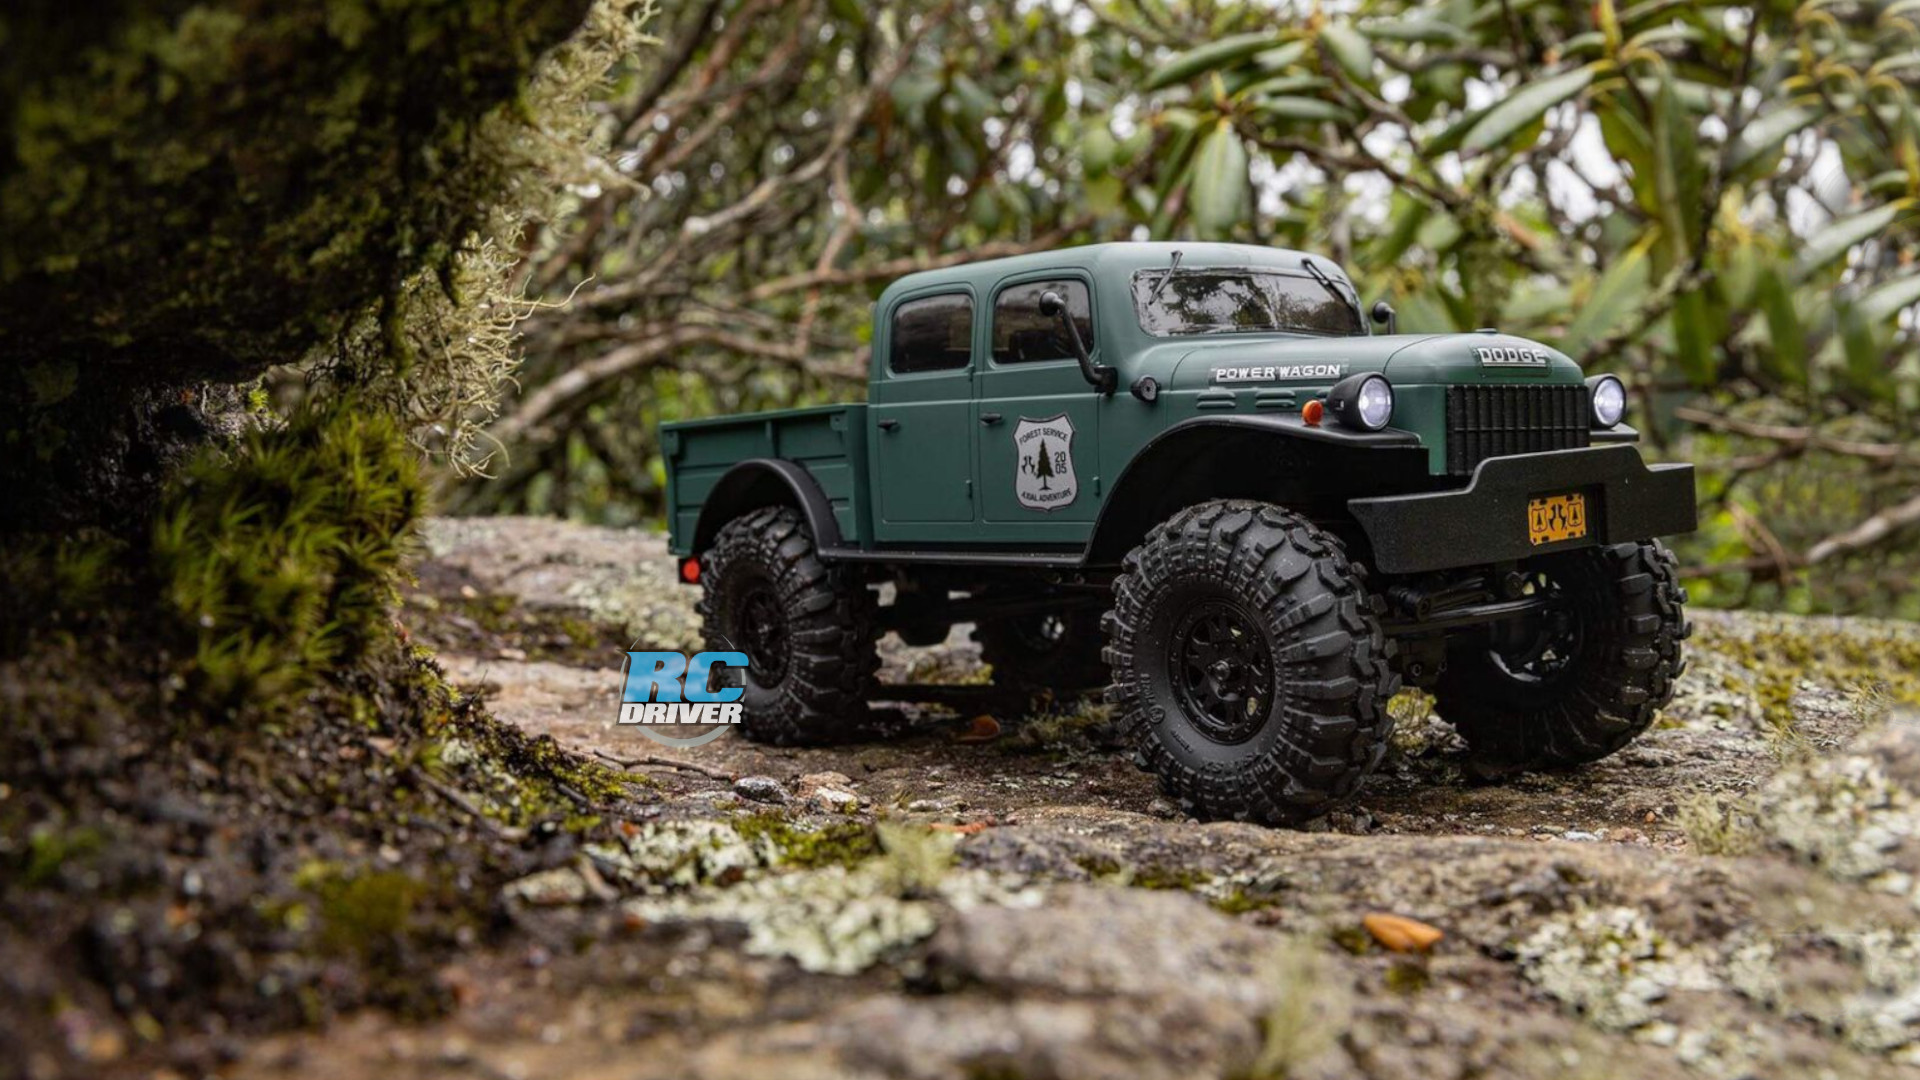 Axial SCX24 Dodge Power Wagon & Flat Bed Trailer